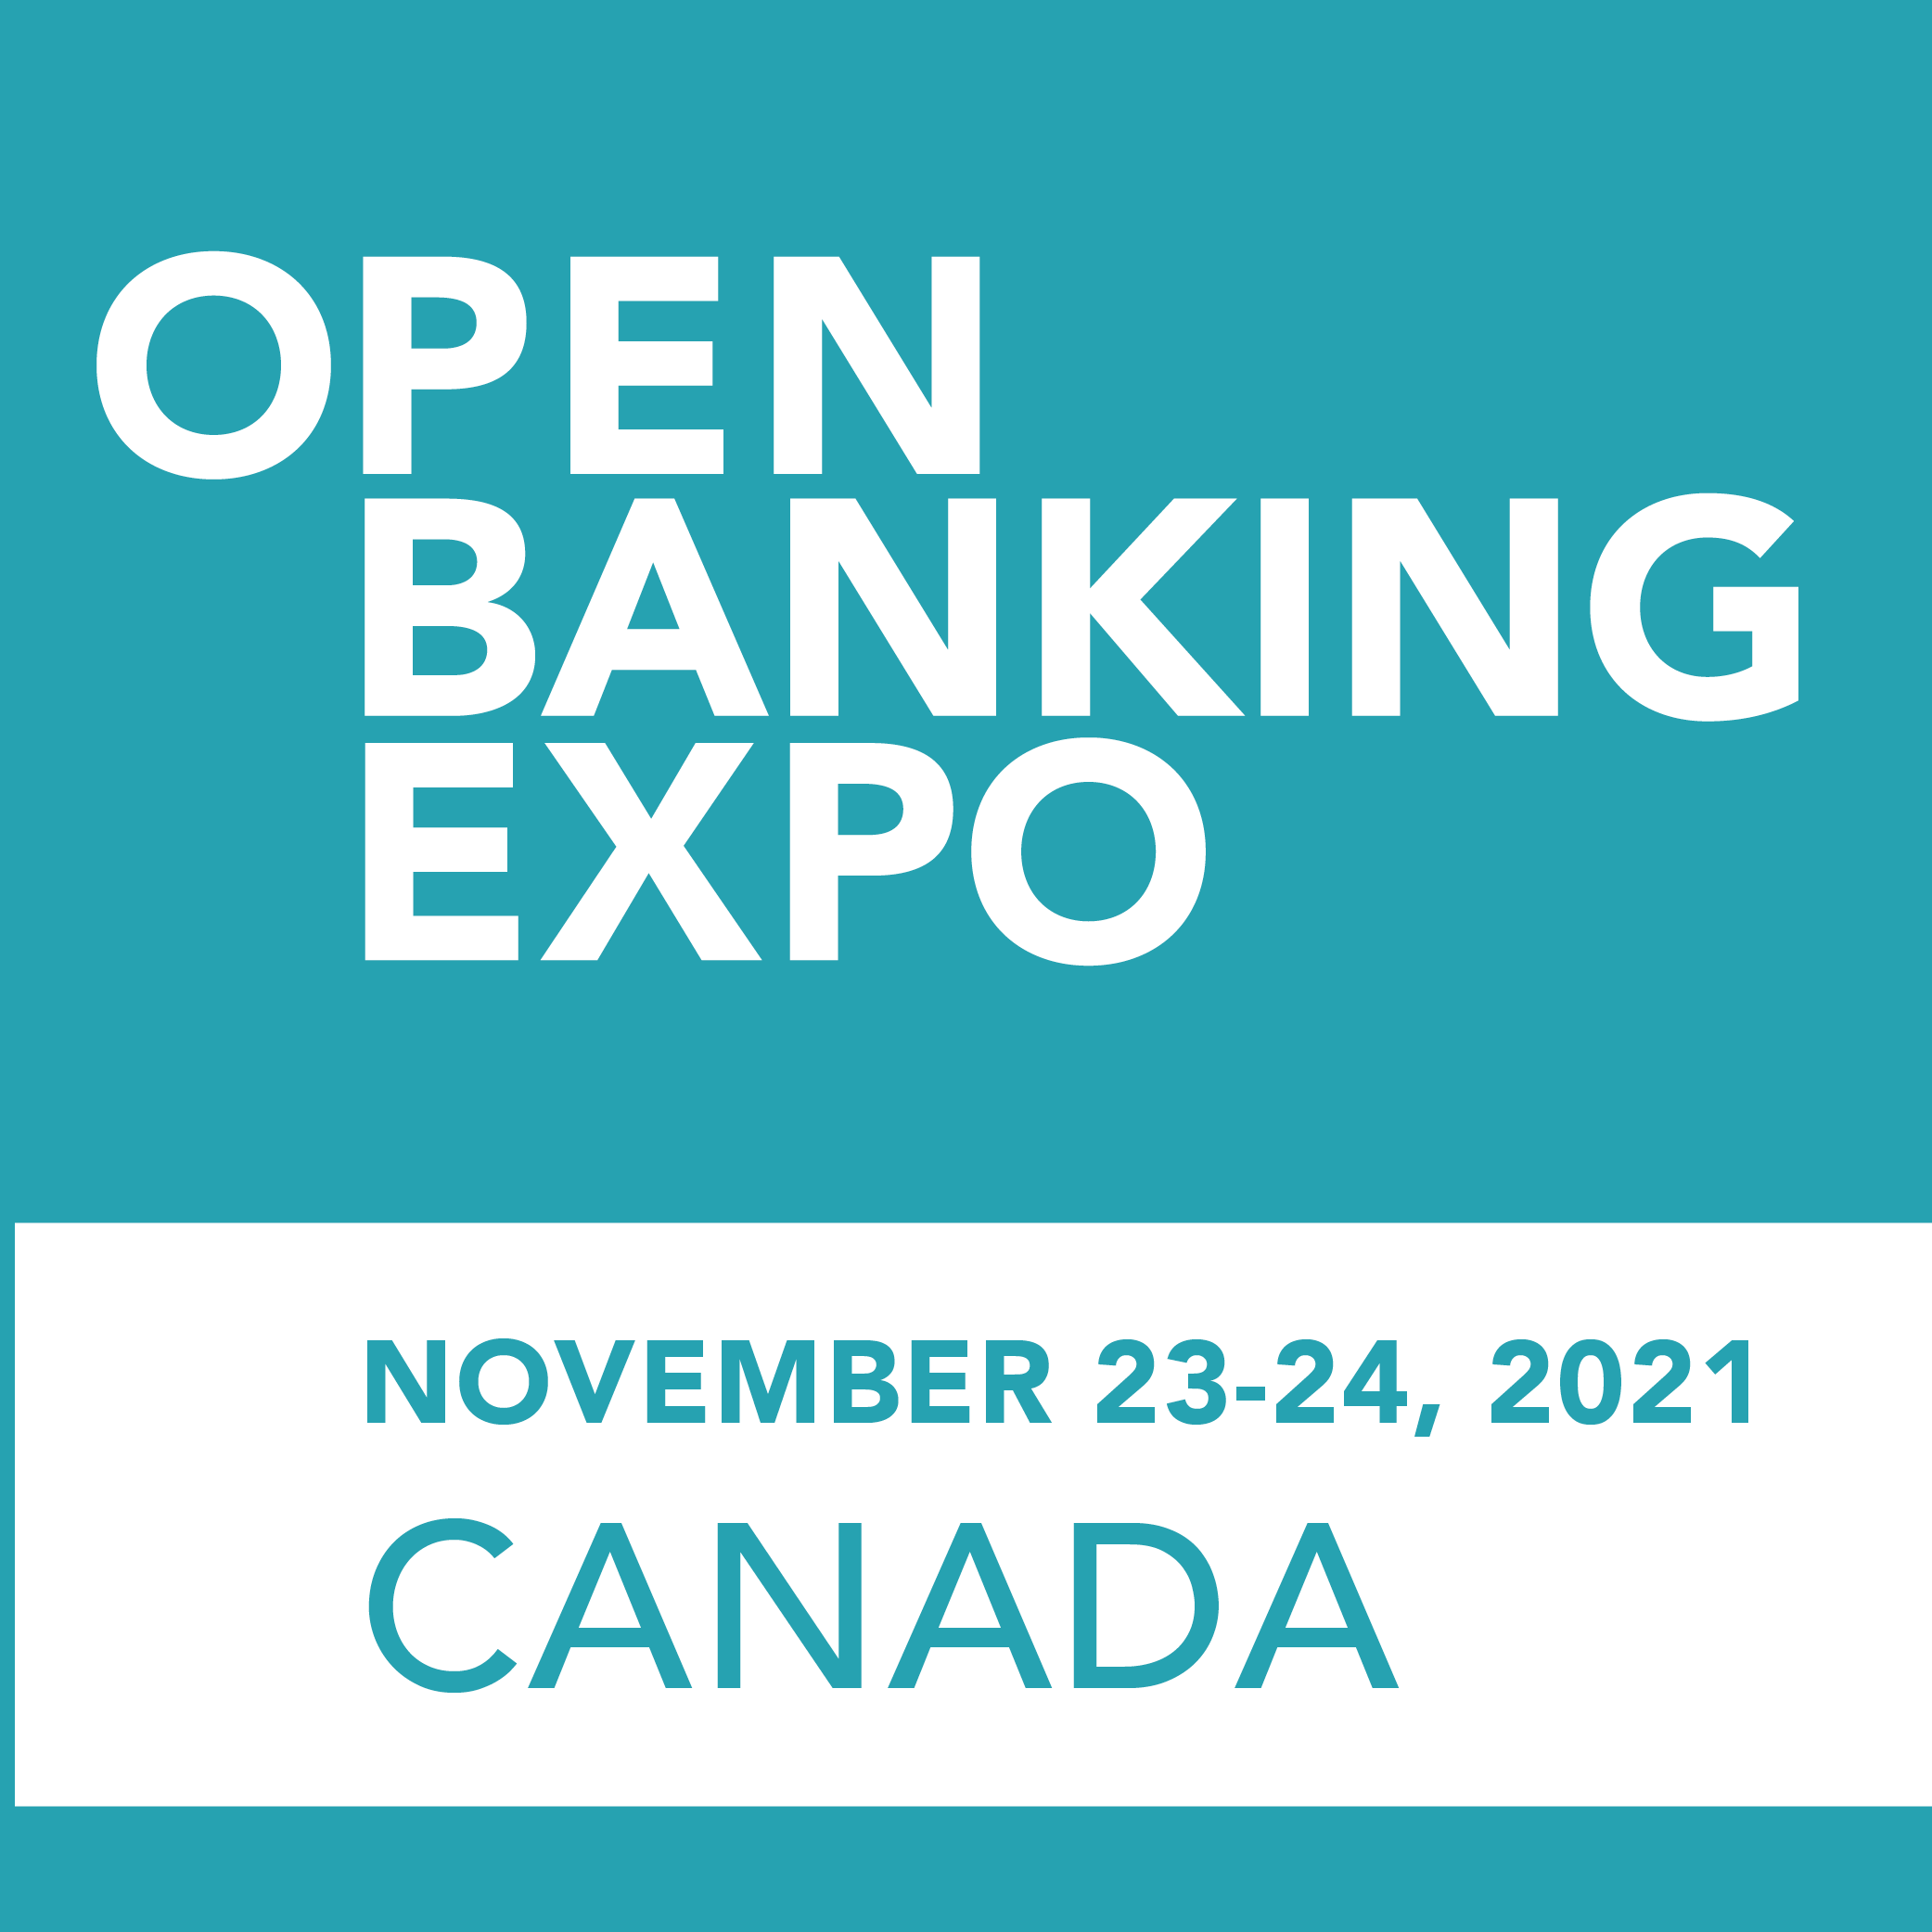 Open Banking Expo Canada organized by Open Banking Expo